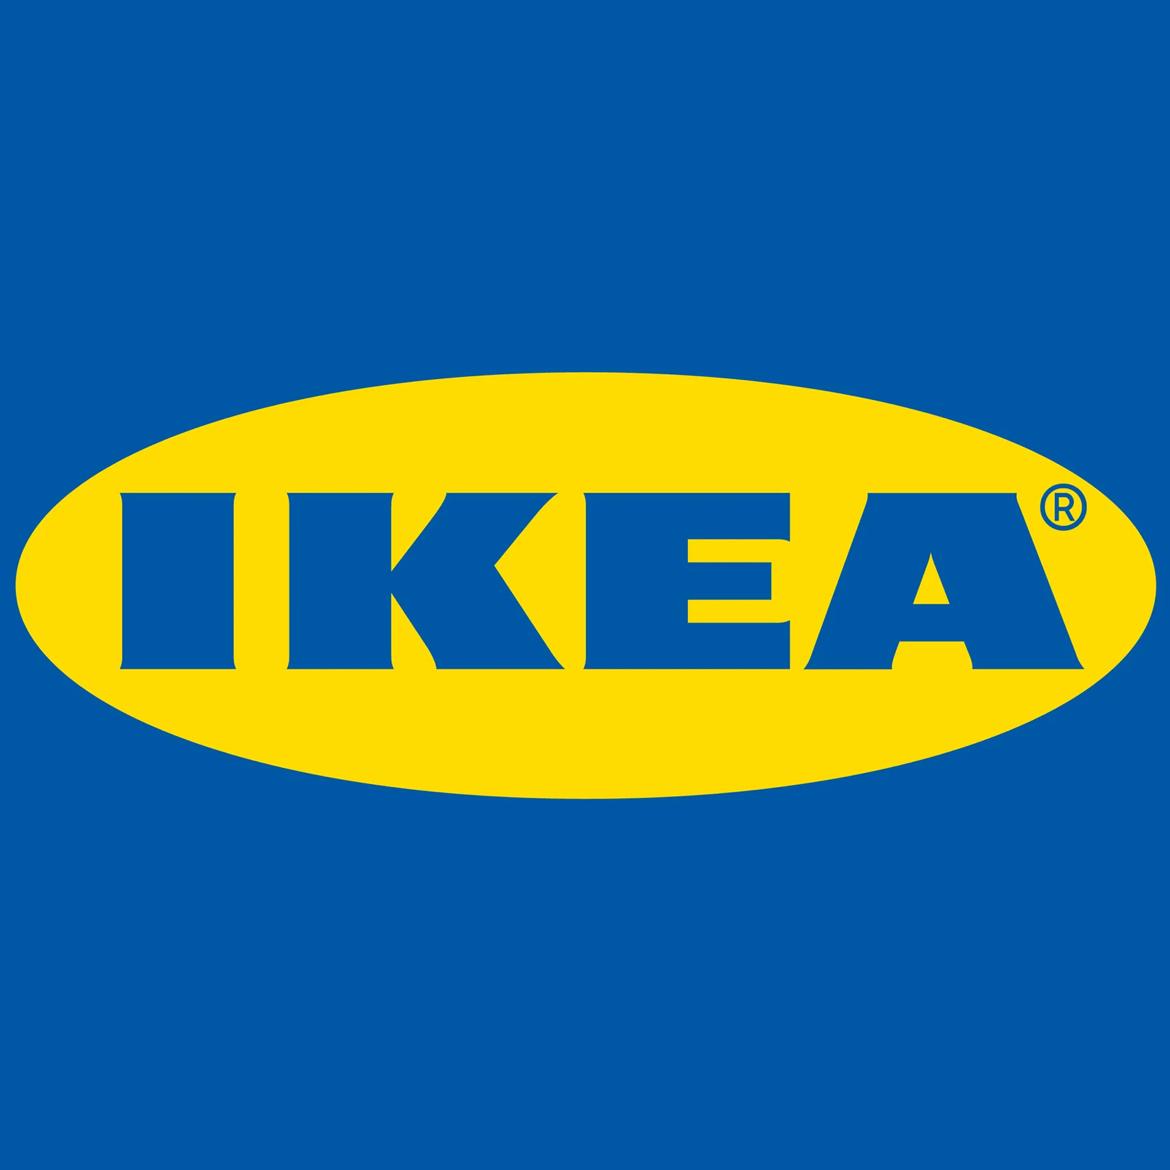 IKEA Support's images